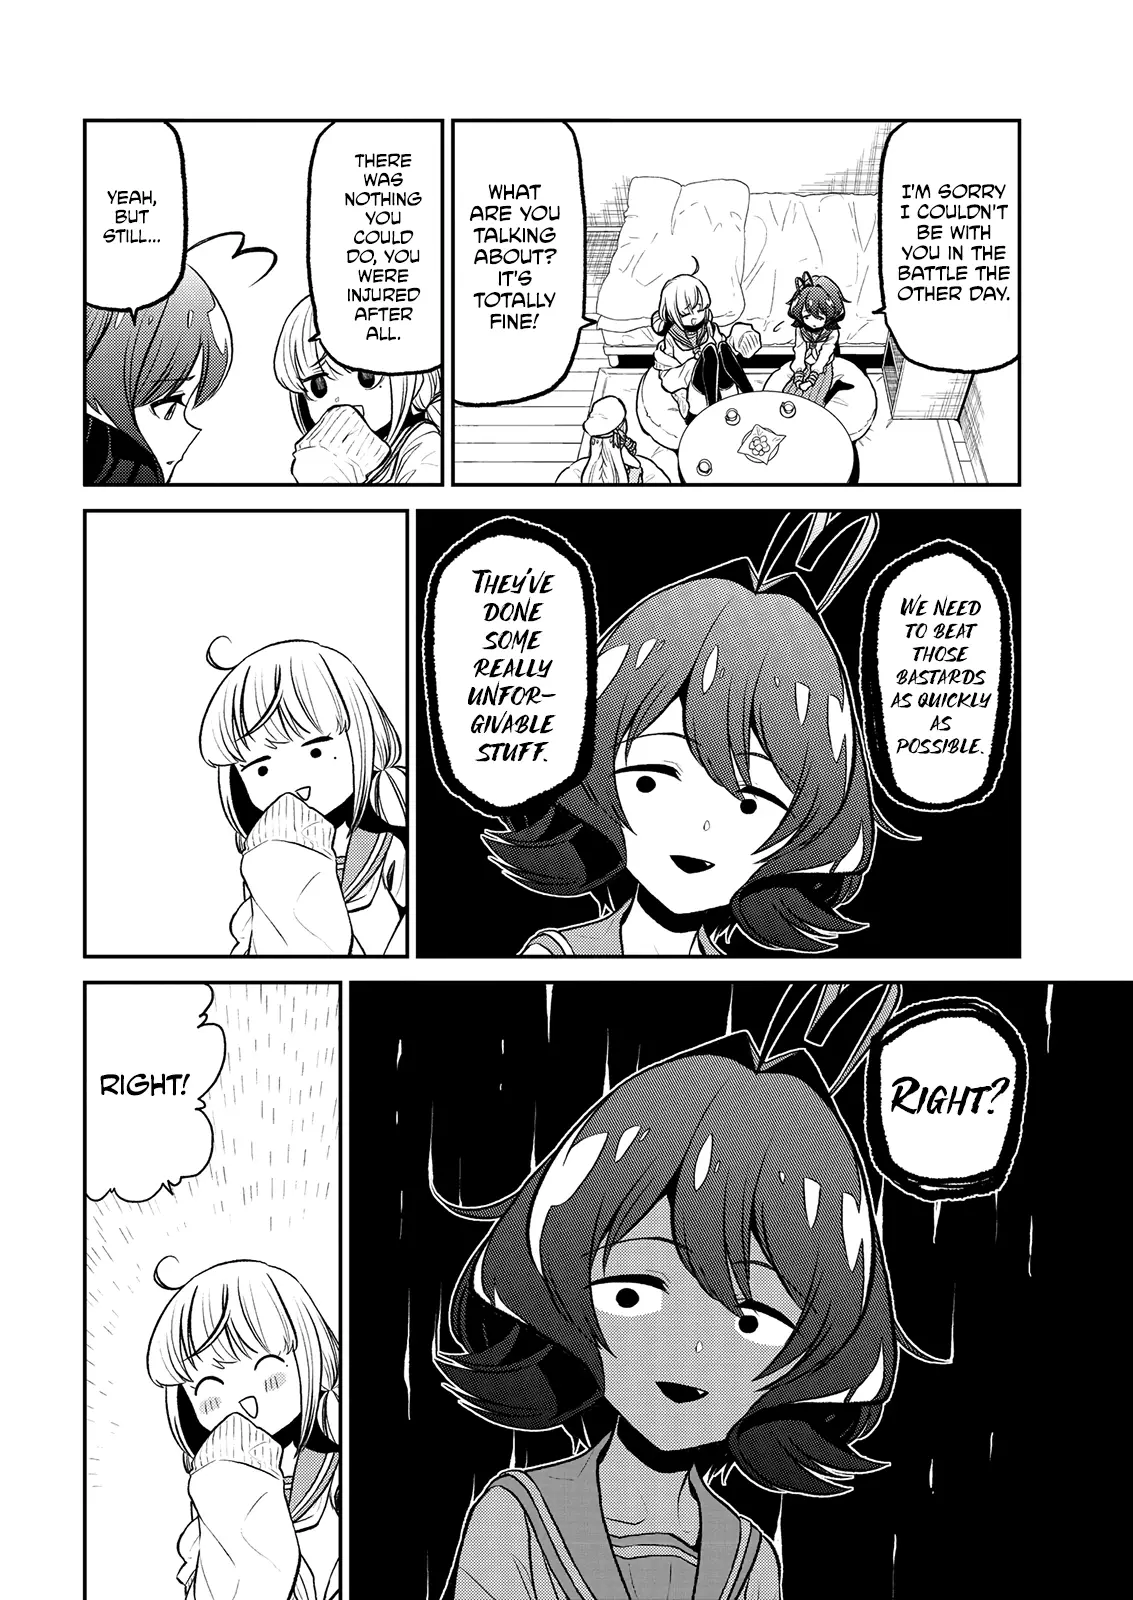 Looking Up To Magical Girls - 14 page 7